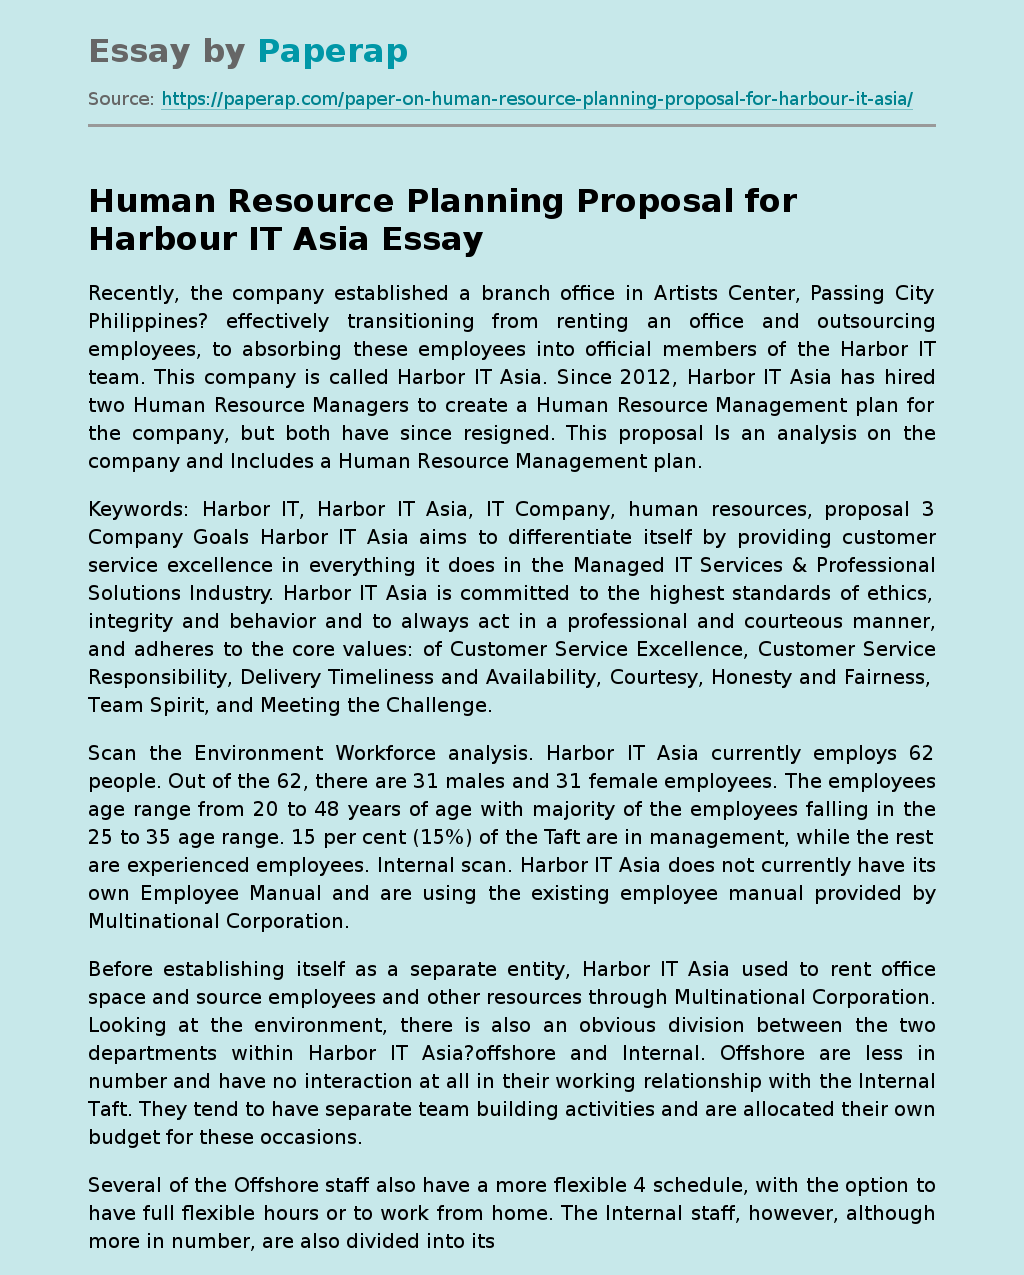 Human Resource Planning Proposal for Harbour IT Asia